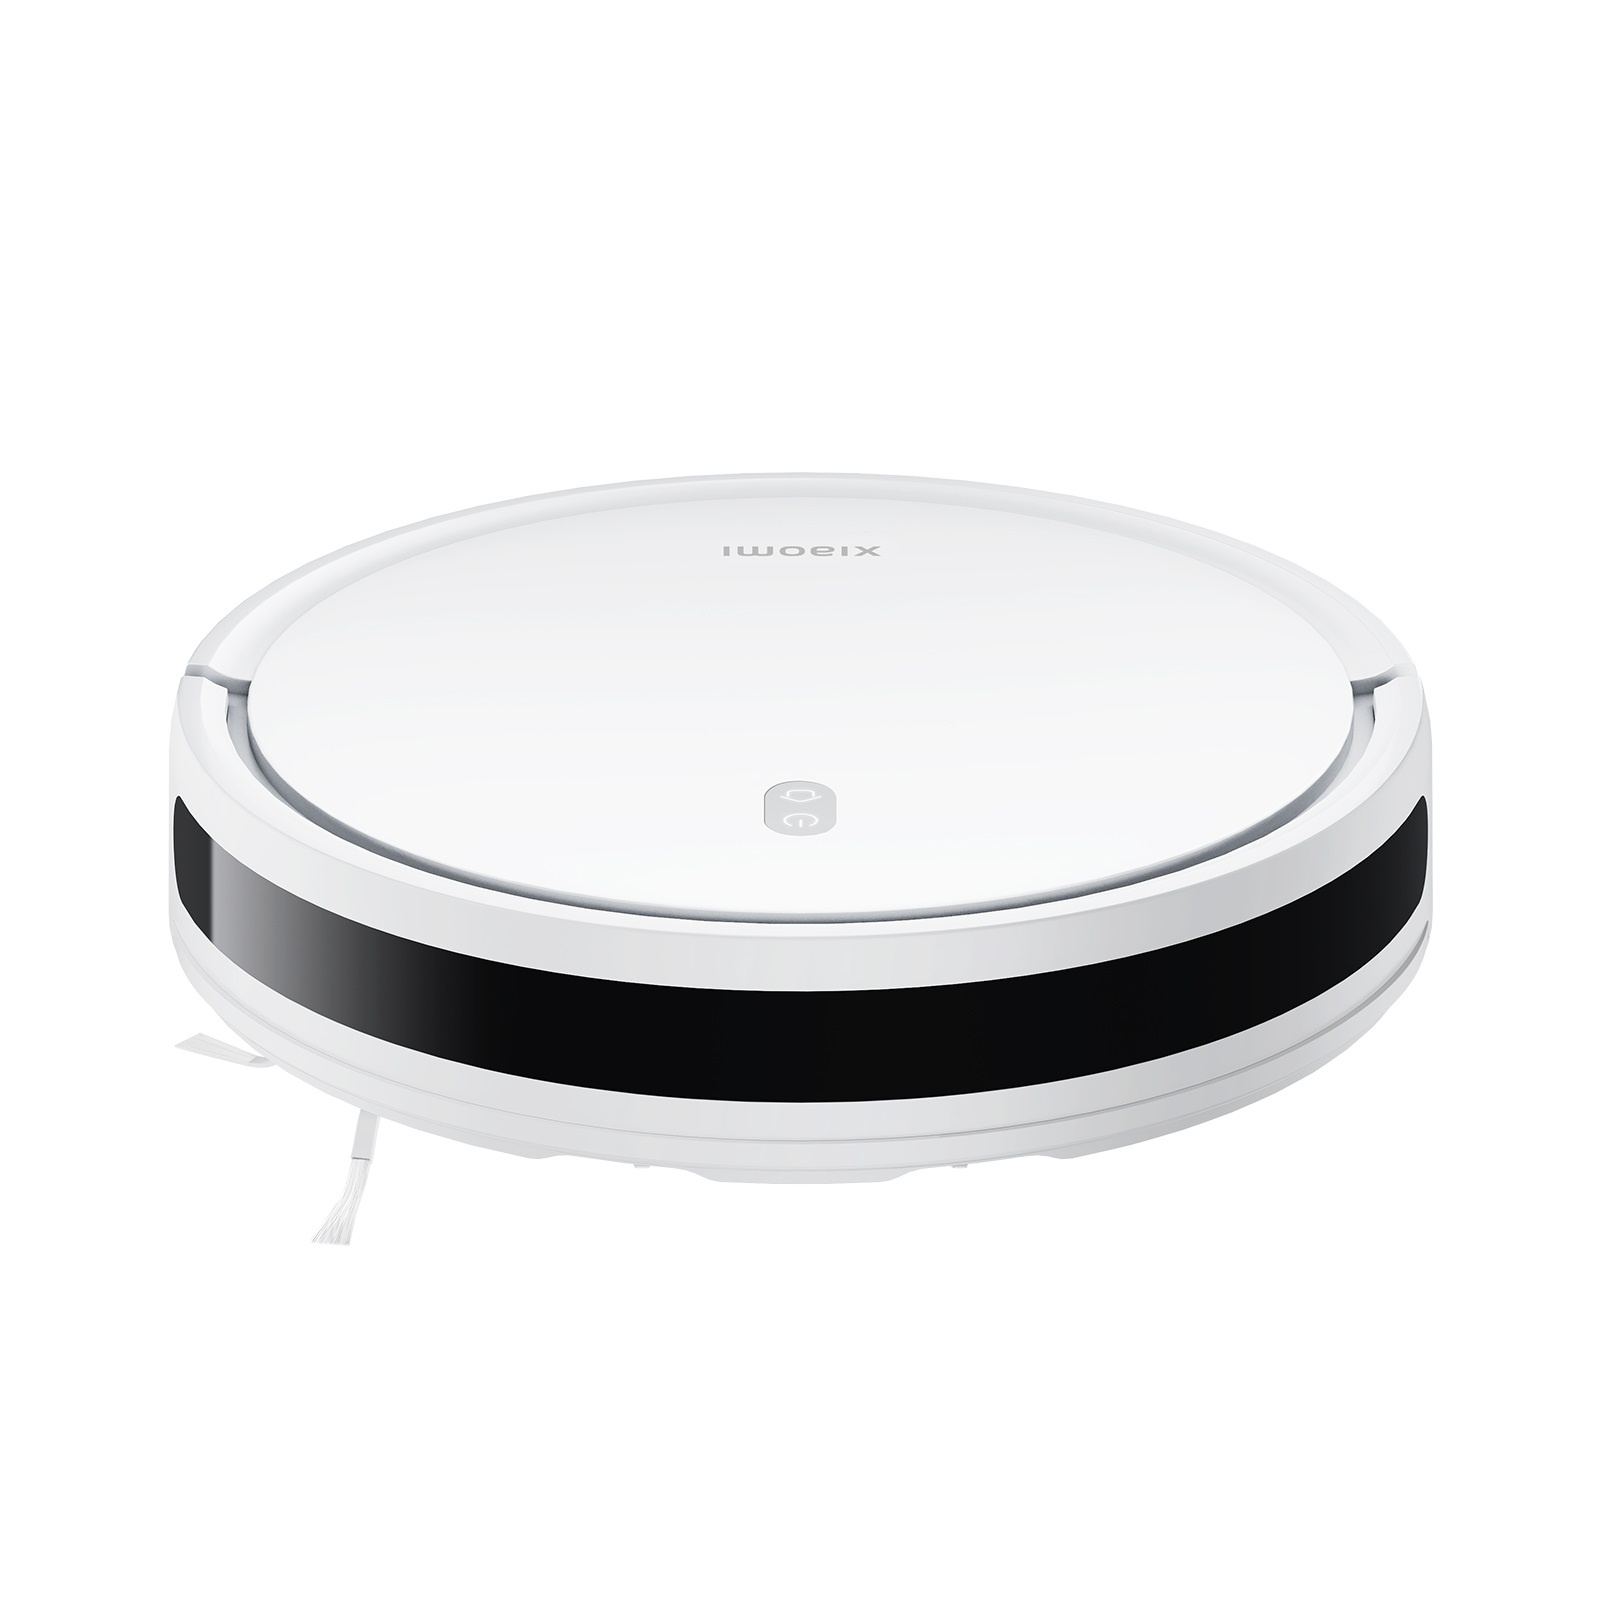 Xiaomi Robotic Vacuum Cleaners for Sale, Shop New & Used Vacuums